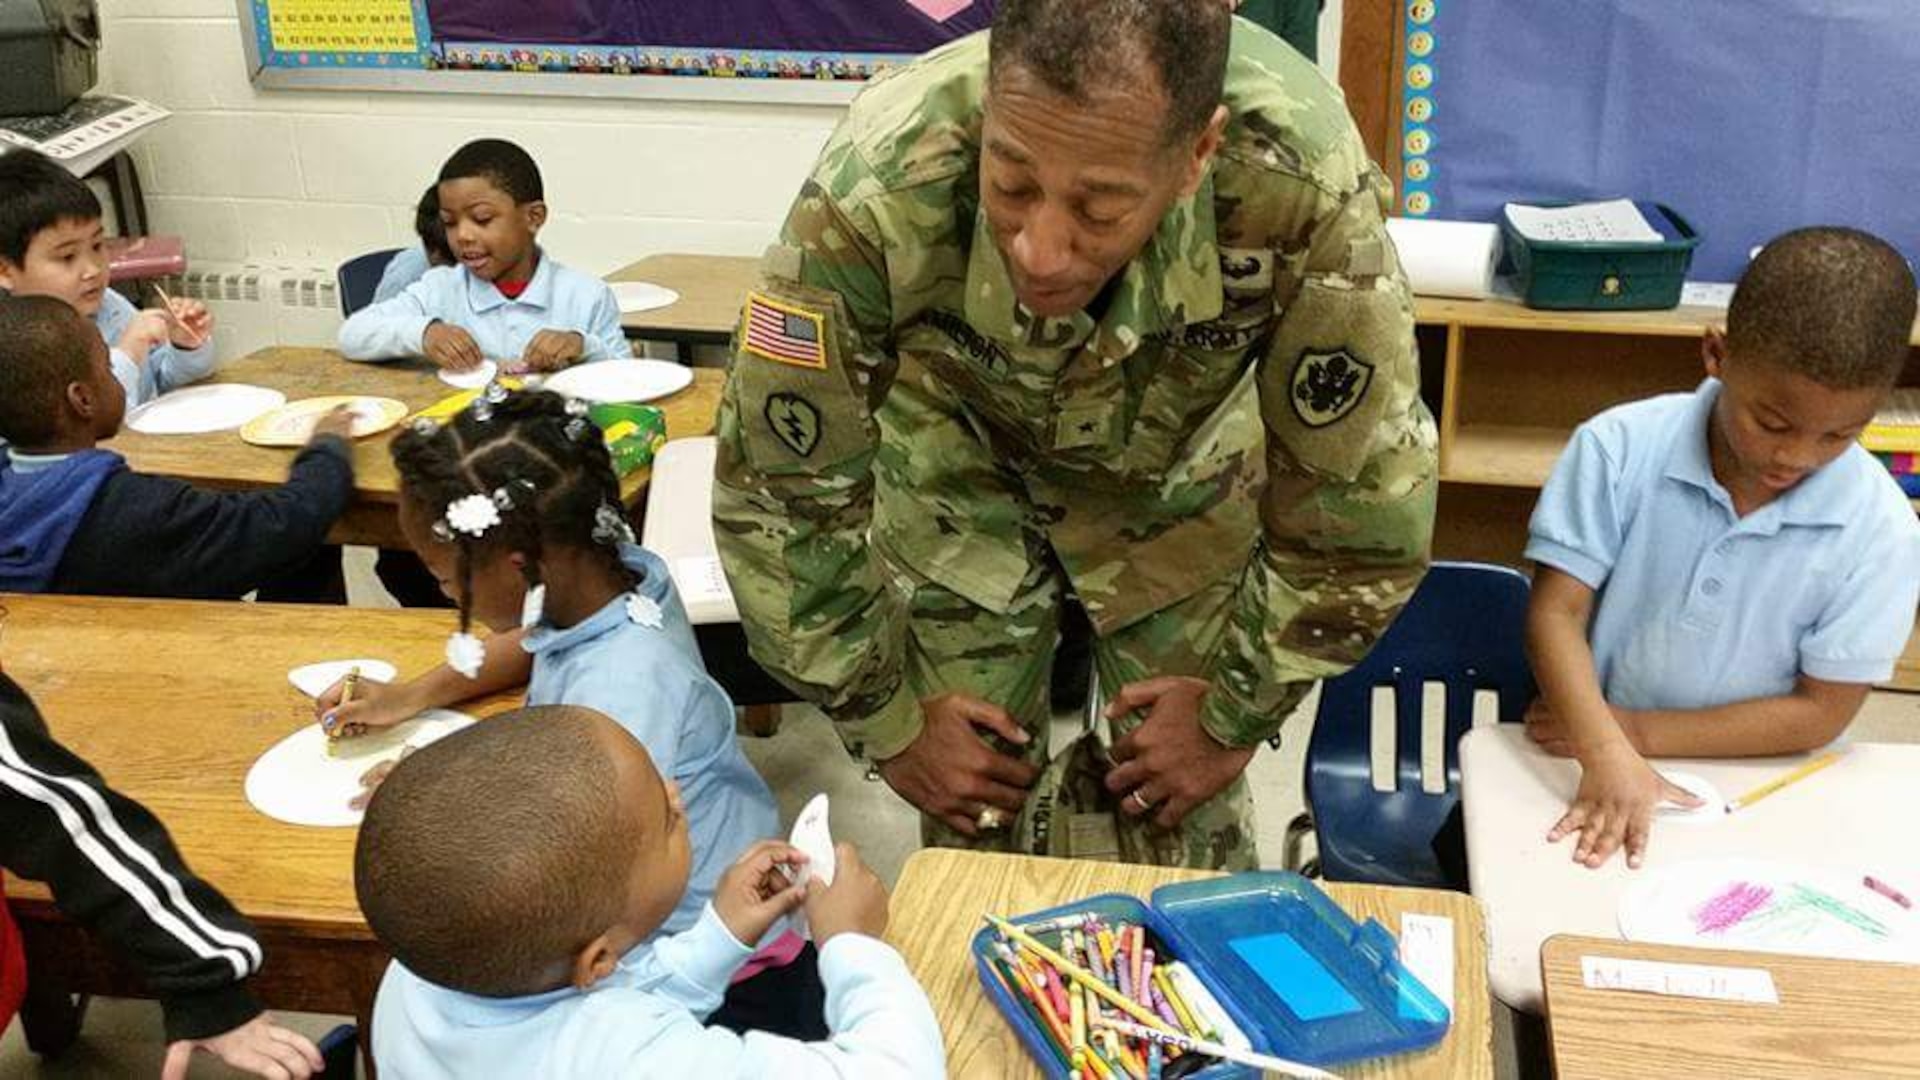 DLA Troop Support Commander Army Brig. Gen. Charles Hamilton greets students at Benjamin Franklin Elementary School during the organization’s annual children’s holiday party Dec. 10, 2015. More than 200 kindergarteners and first-graders participated in arts and crafts, games and received gifts donated by DLA Troop Support employees.